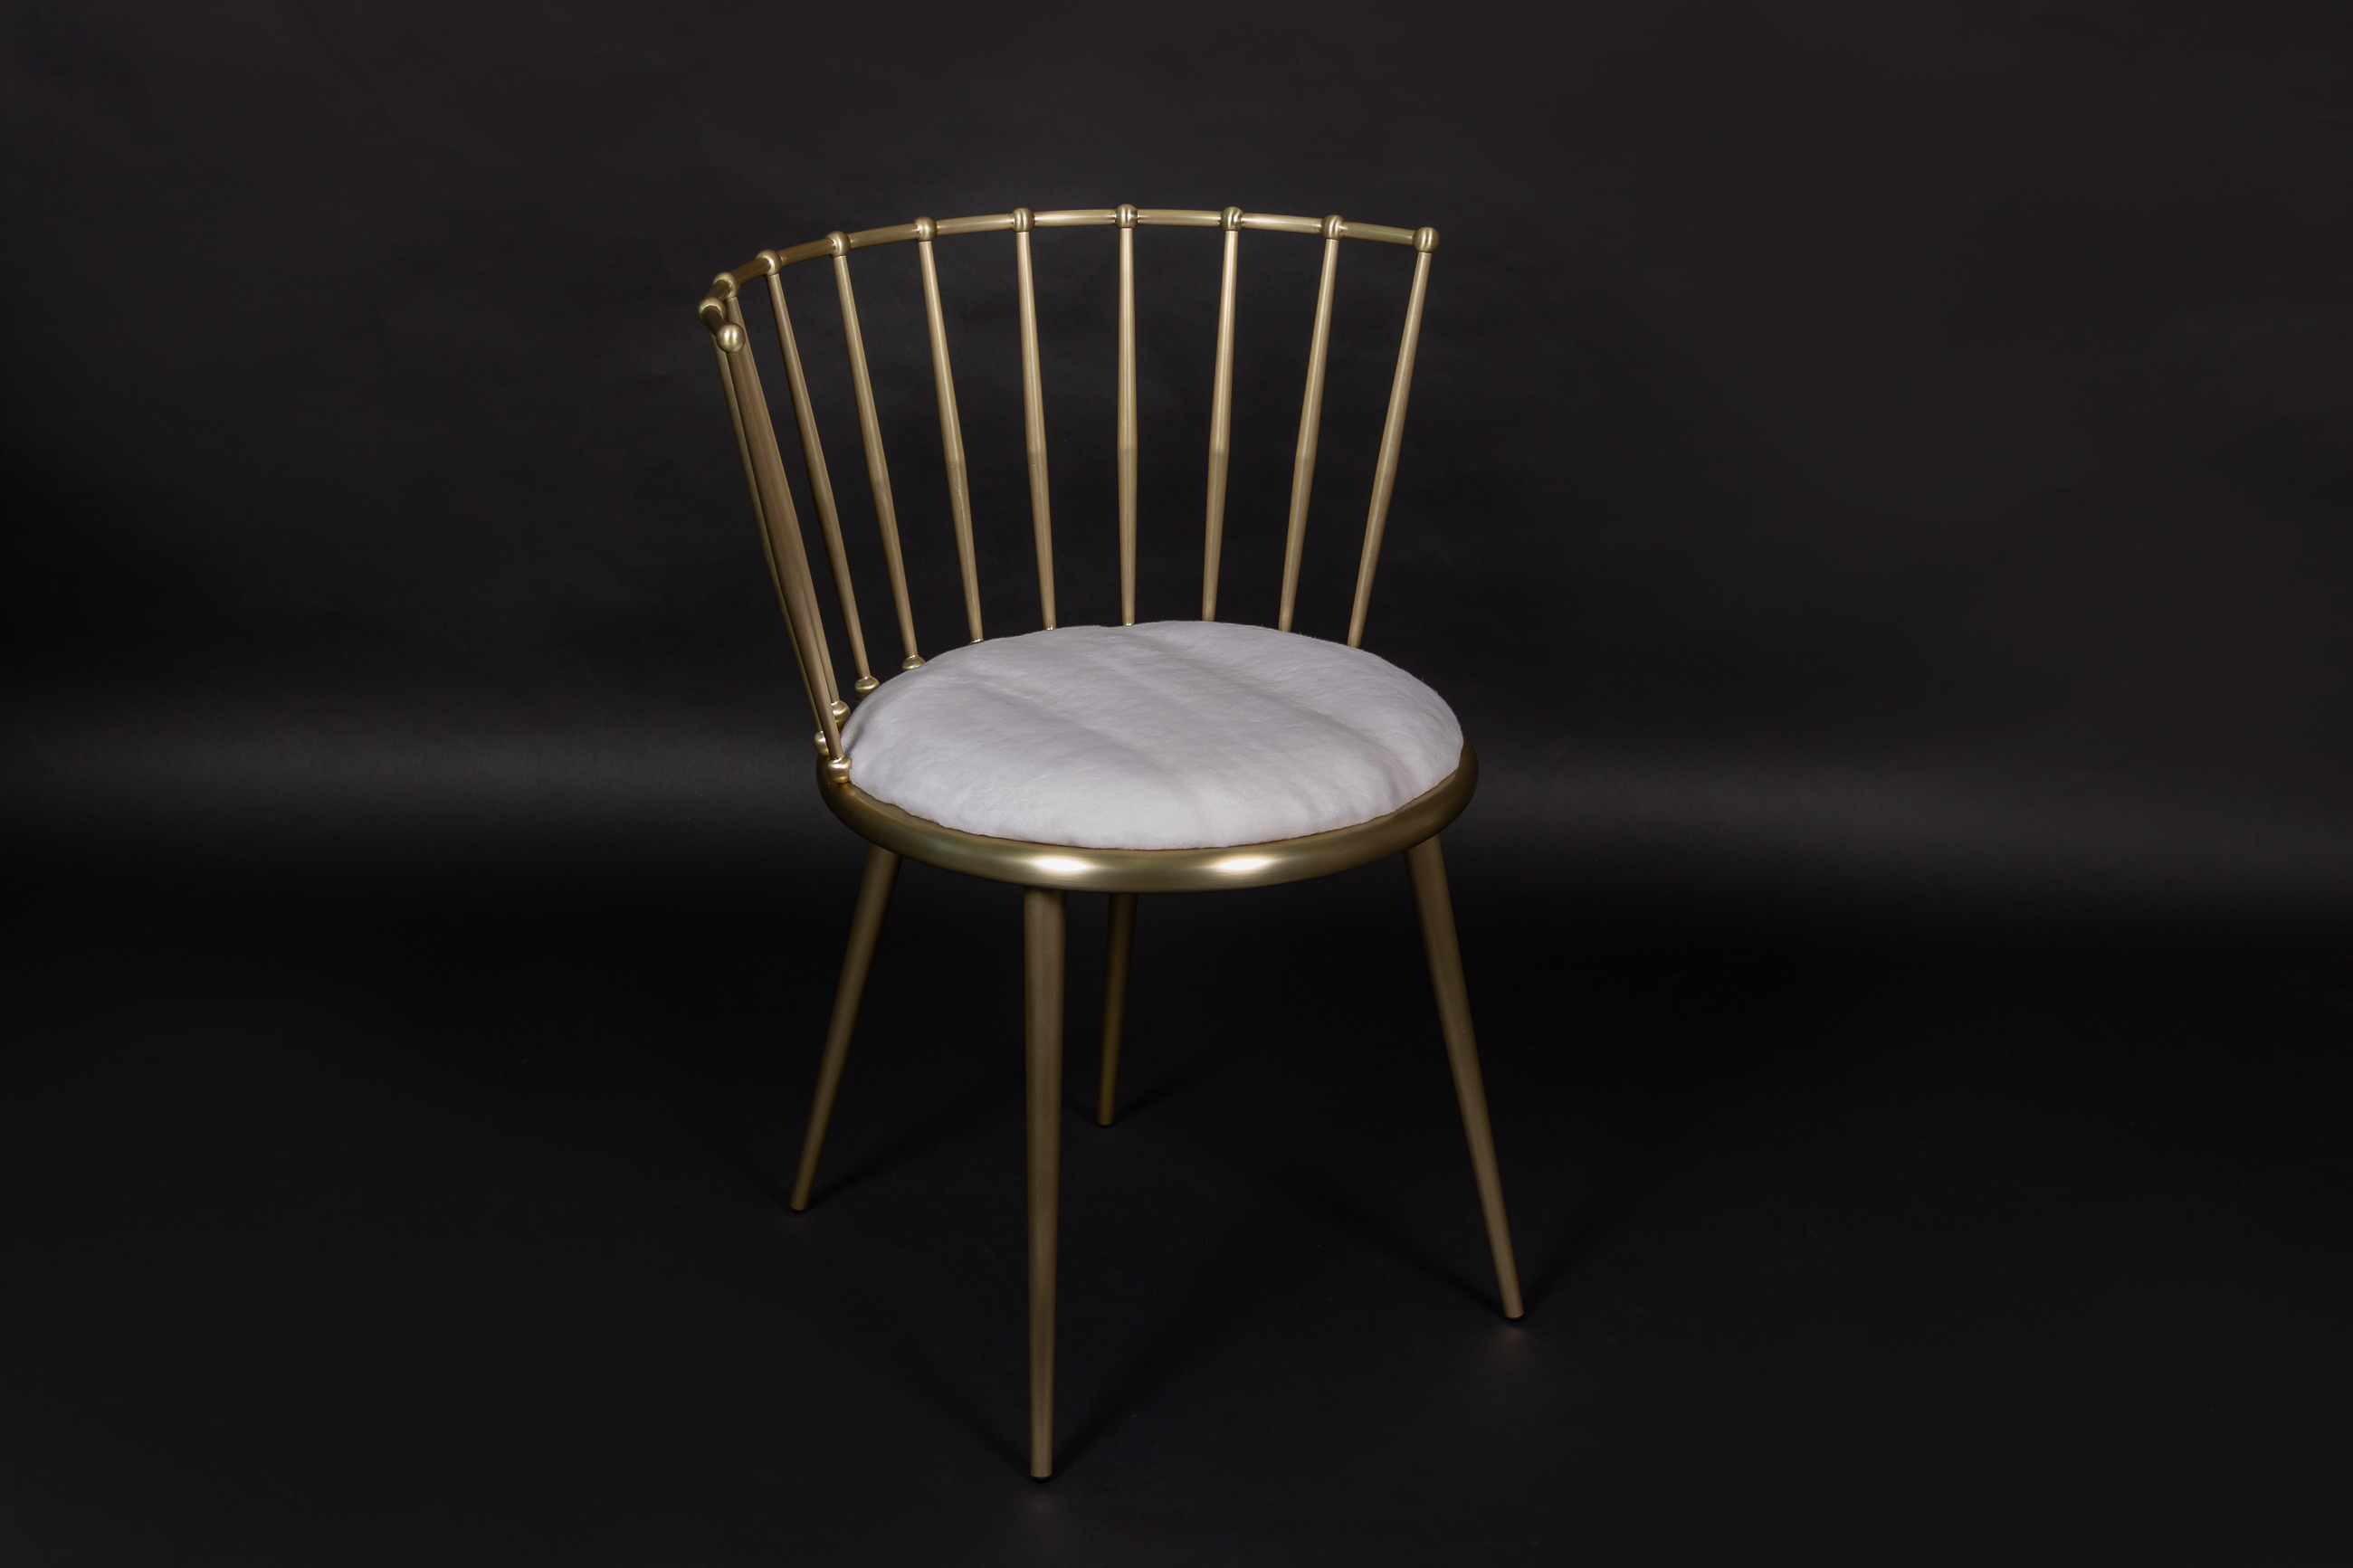 Elegant White Golden Chair with Plucked Mink